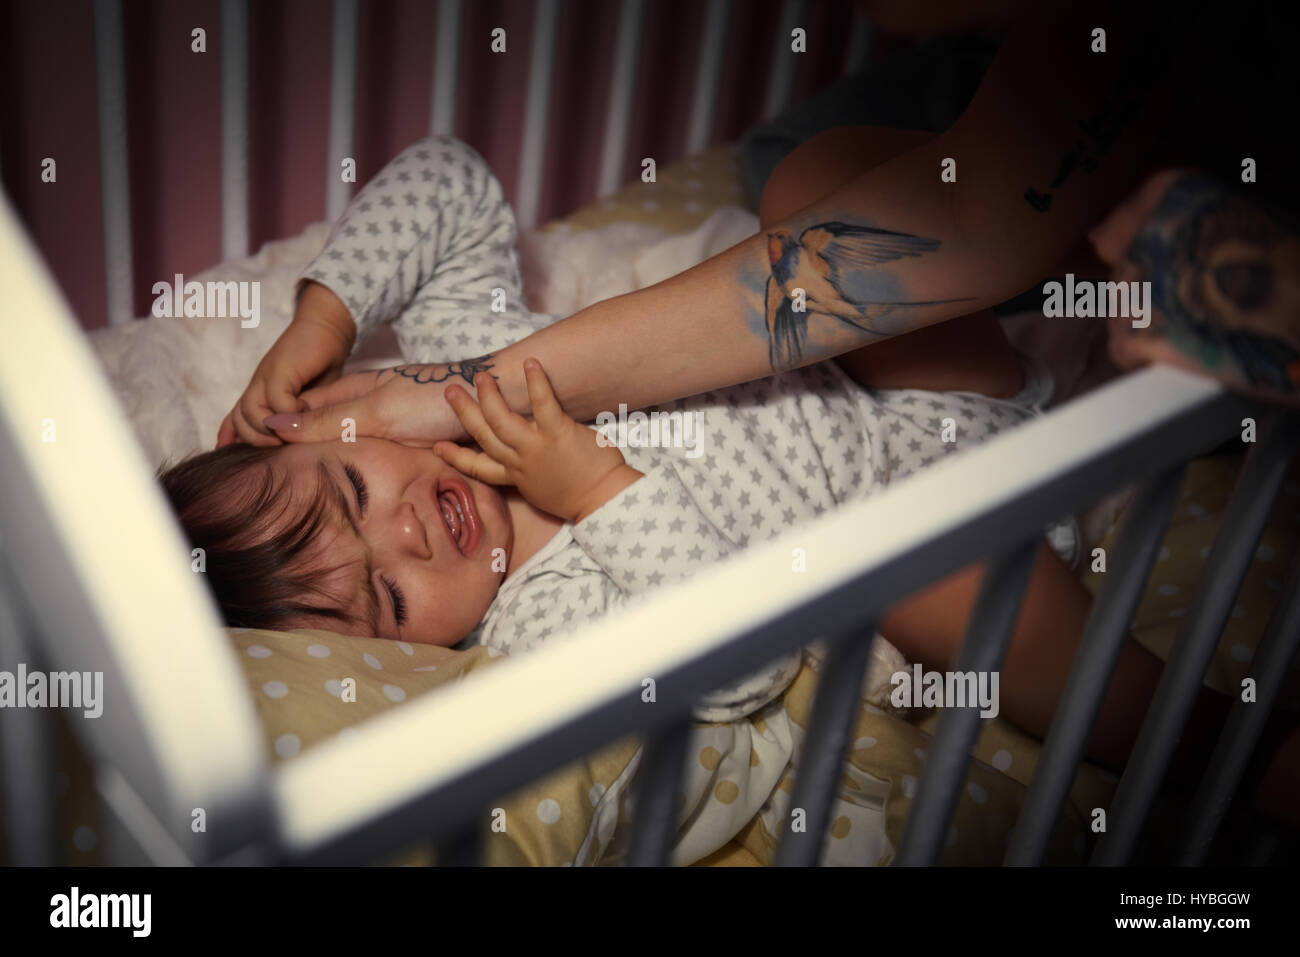 Crying baby boy in a crib Stock Photo